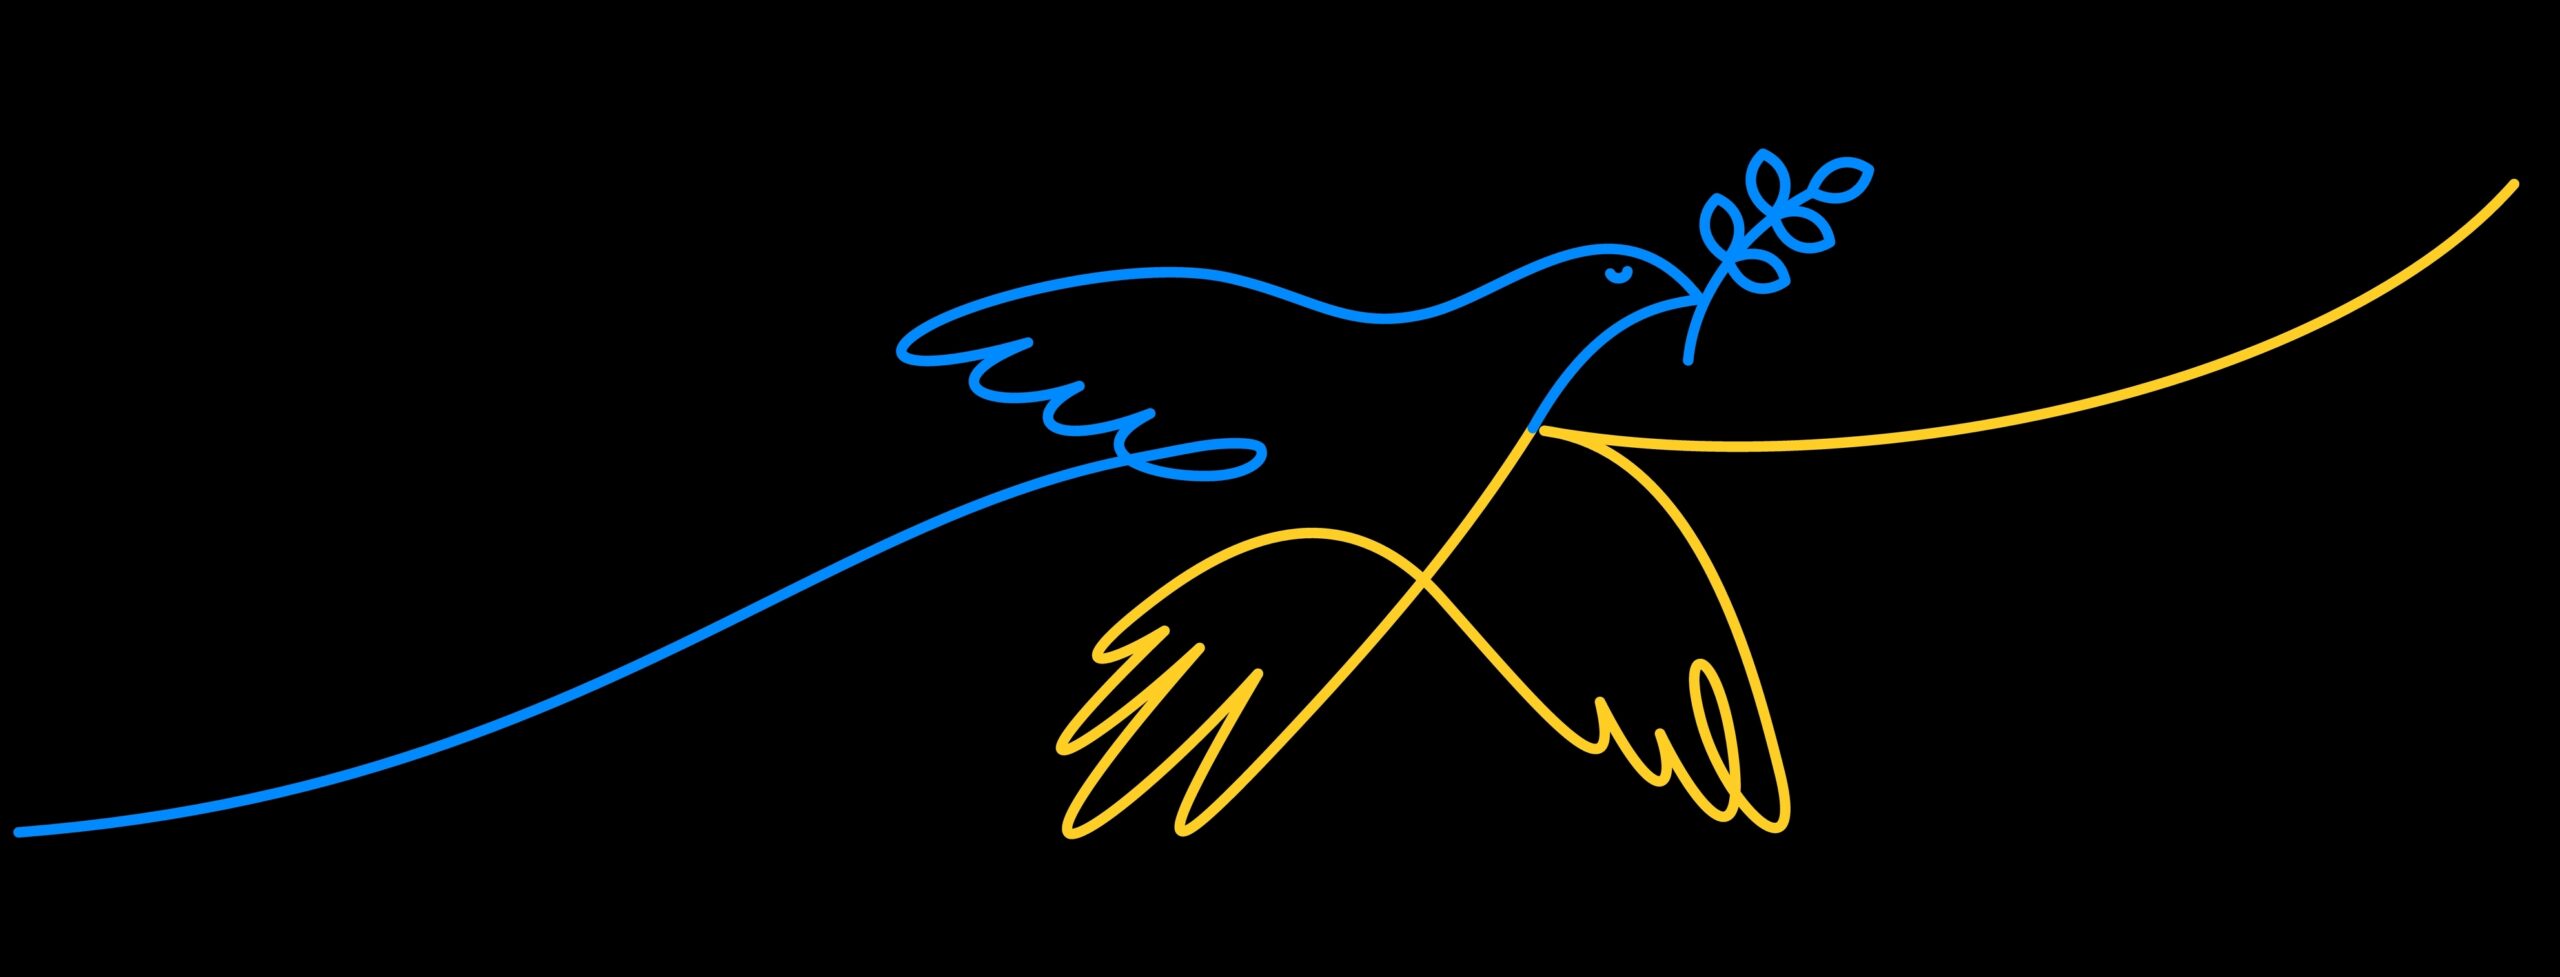 flying,bird,as,a,symbol,of,peace.,support,ukraine.,no